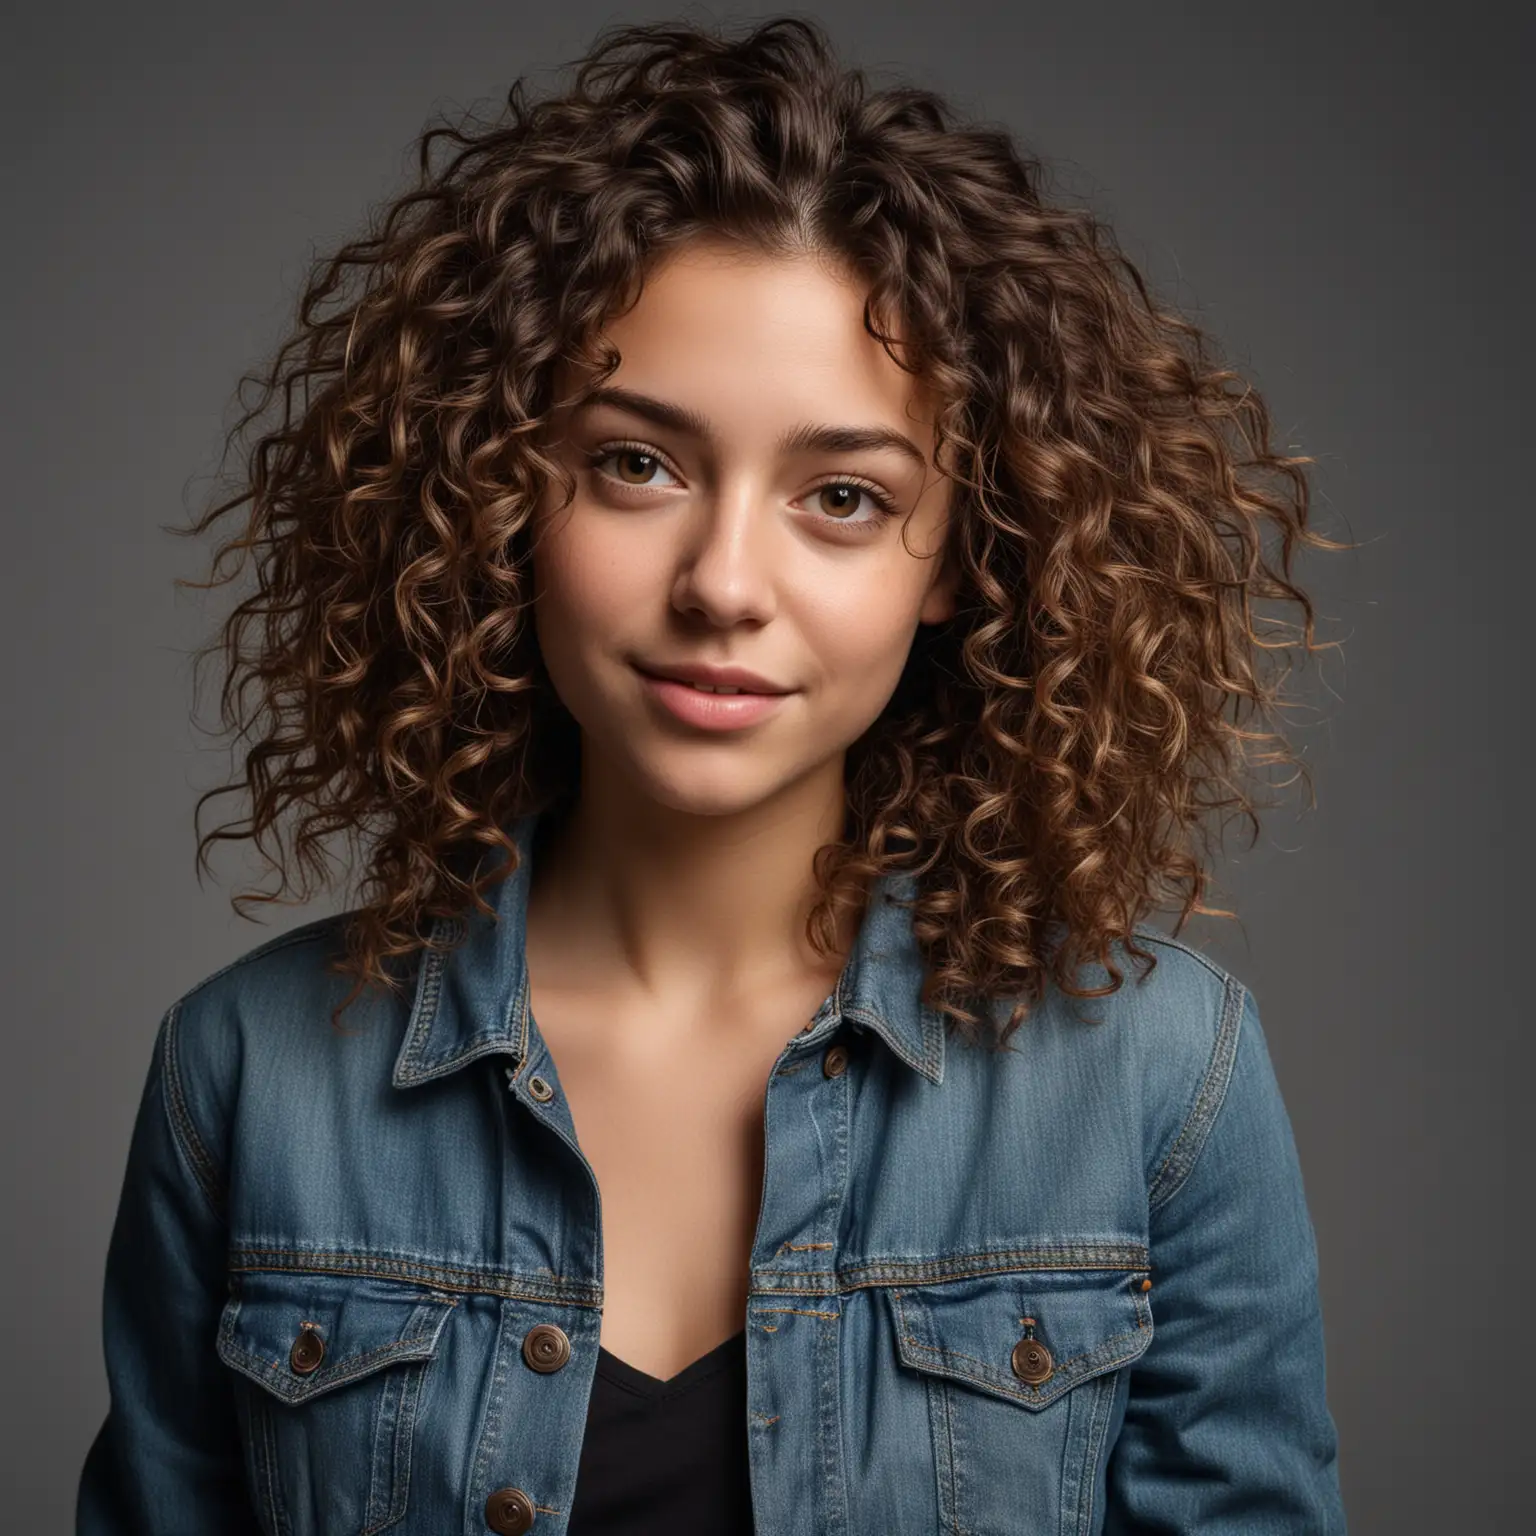 A young woman with medium-length, tousled curly hair is photographed against a gray background. She is wearing a denim jacket over a black top, and has a relaxed, confident expression on her face. The image highlights her natural beauty and stylish, casual look.